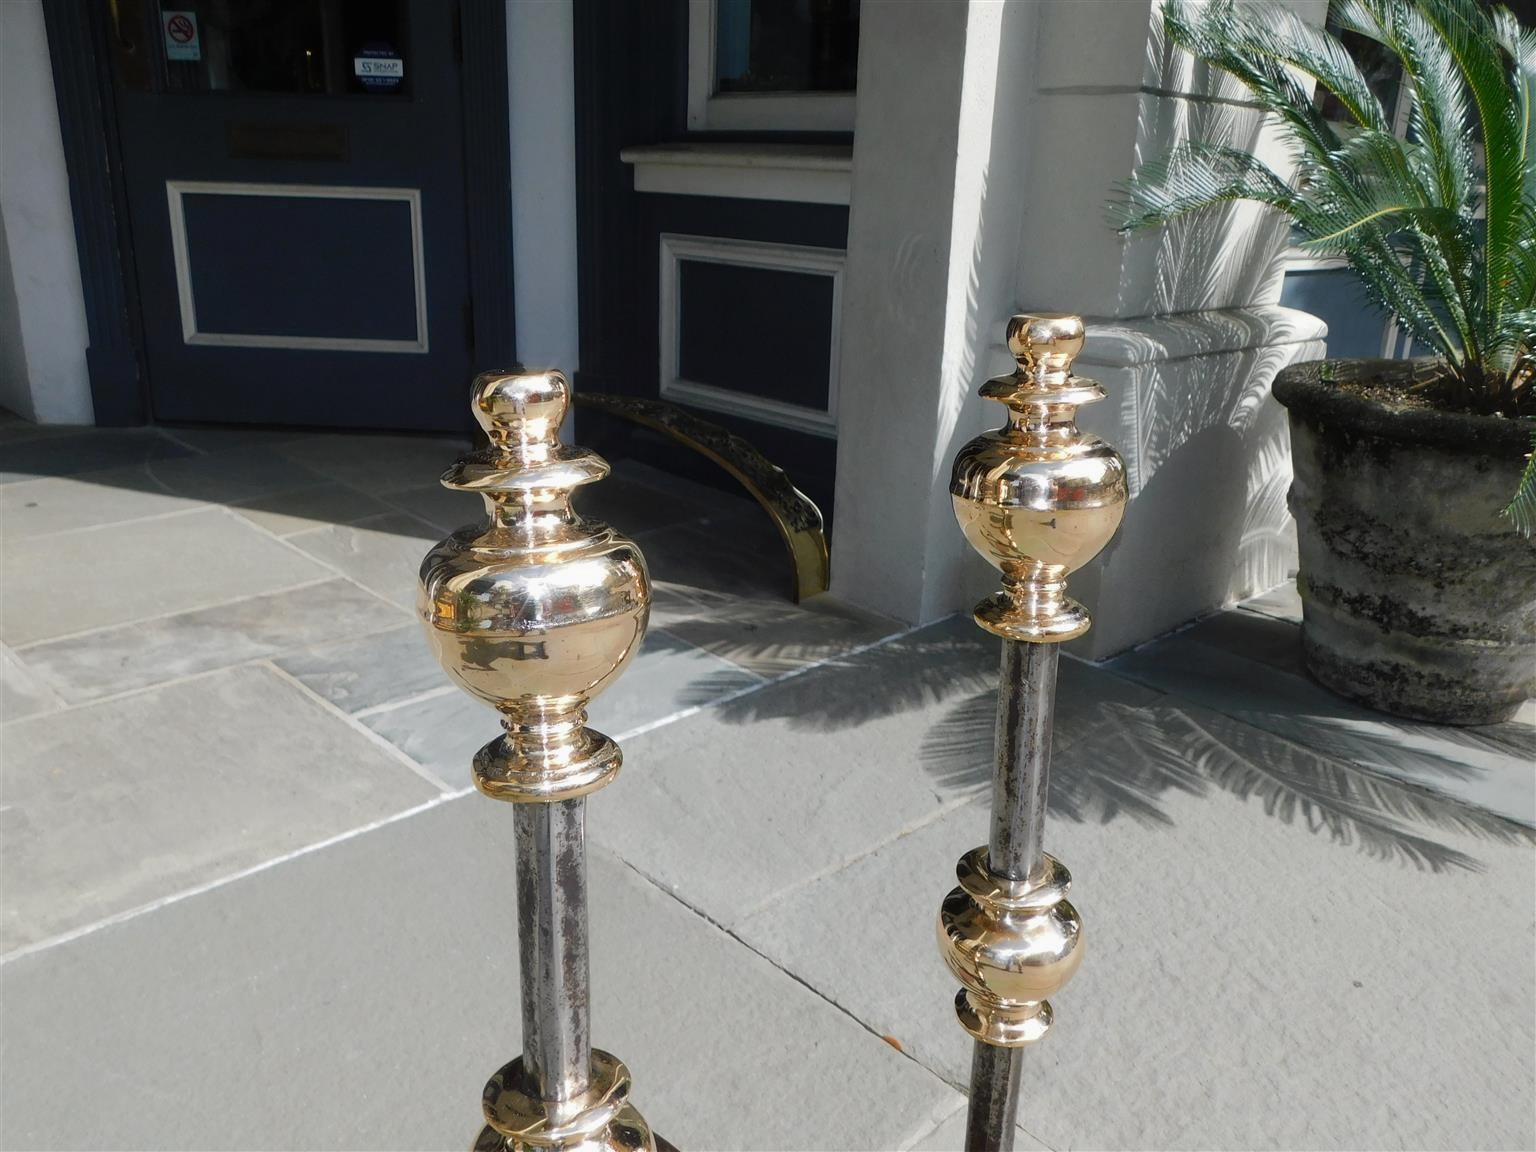 Cast Pair of English Brass and Polished Steel Urn Finial Fire Place Andirons, C. 1780 For Sale